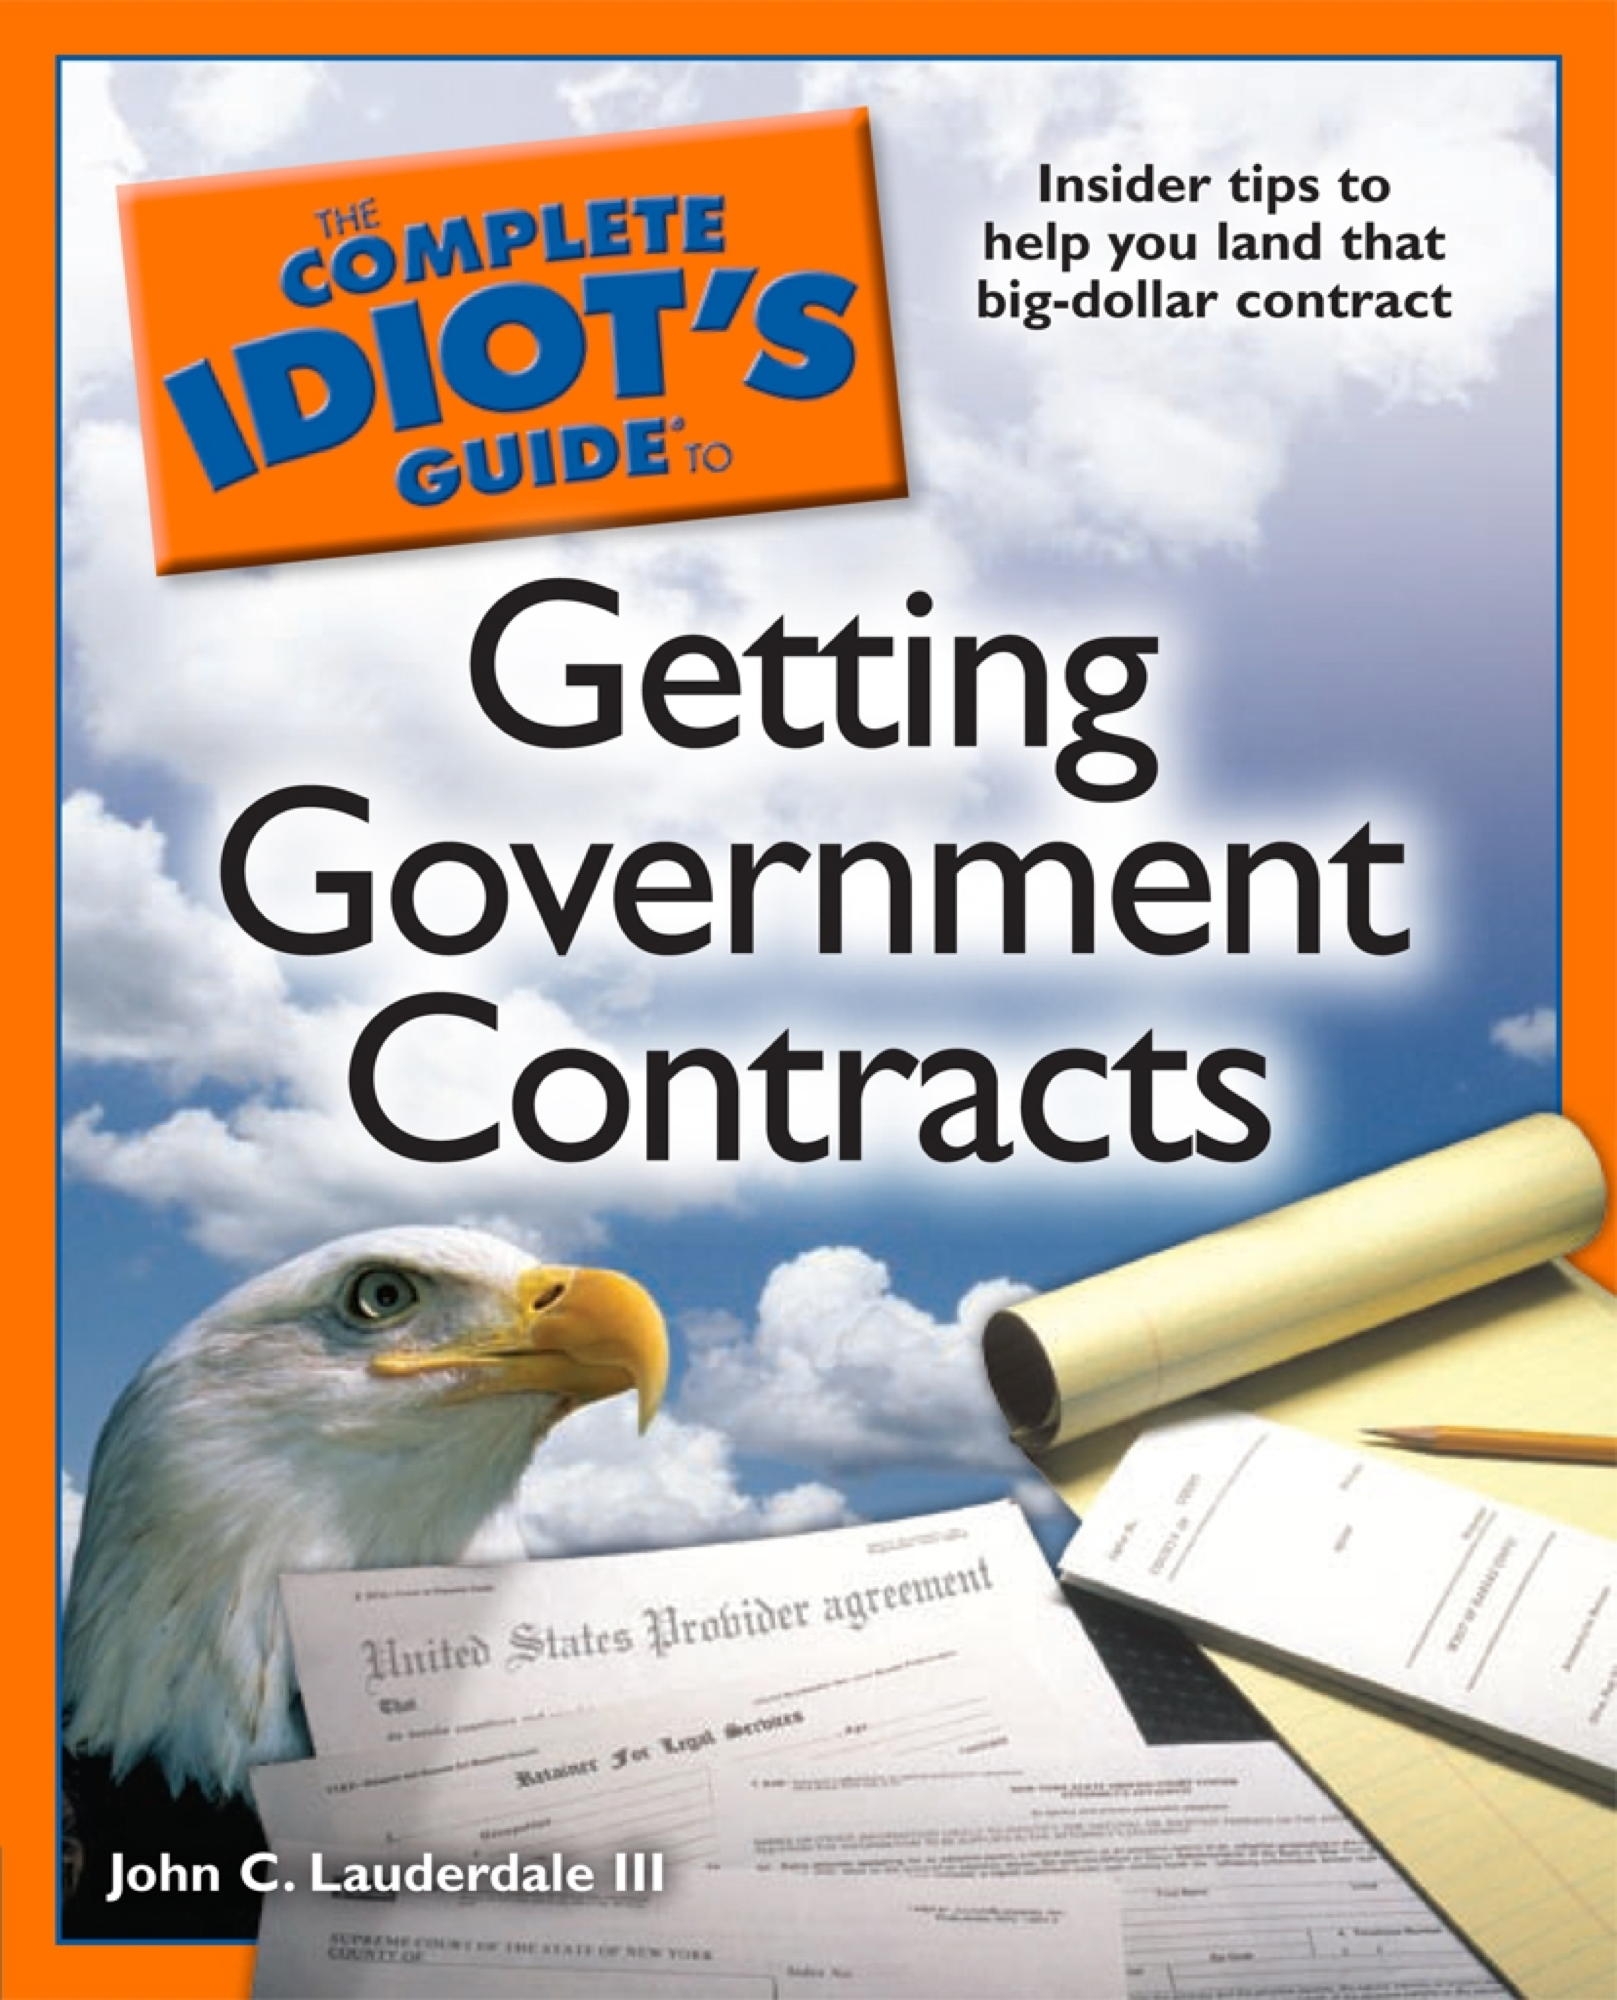 The Complete Idiot's Guide to Getting Government Contracts